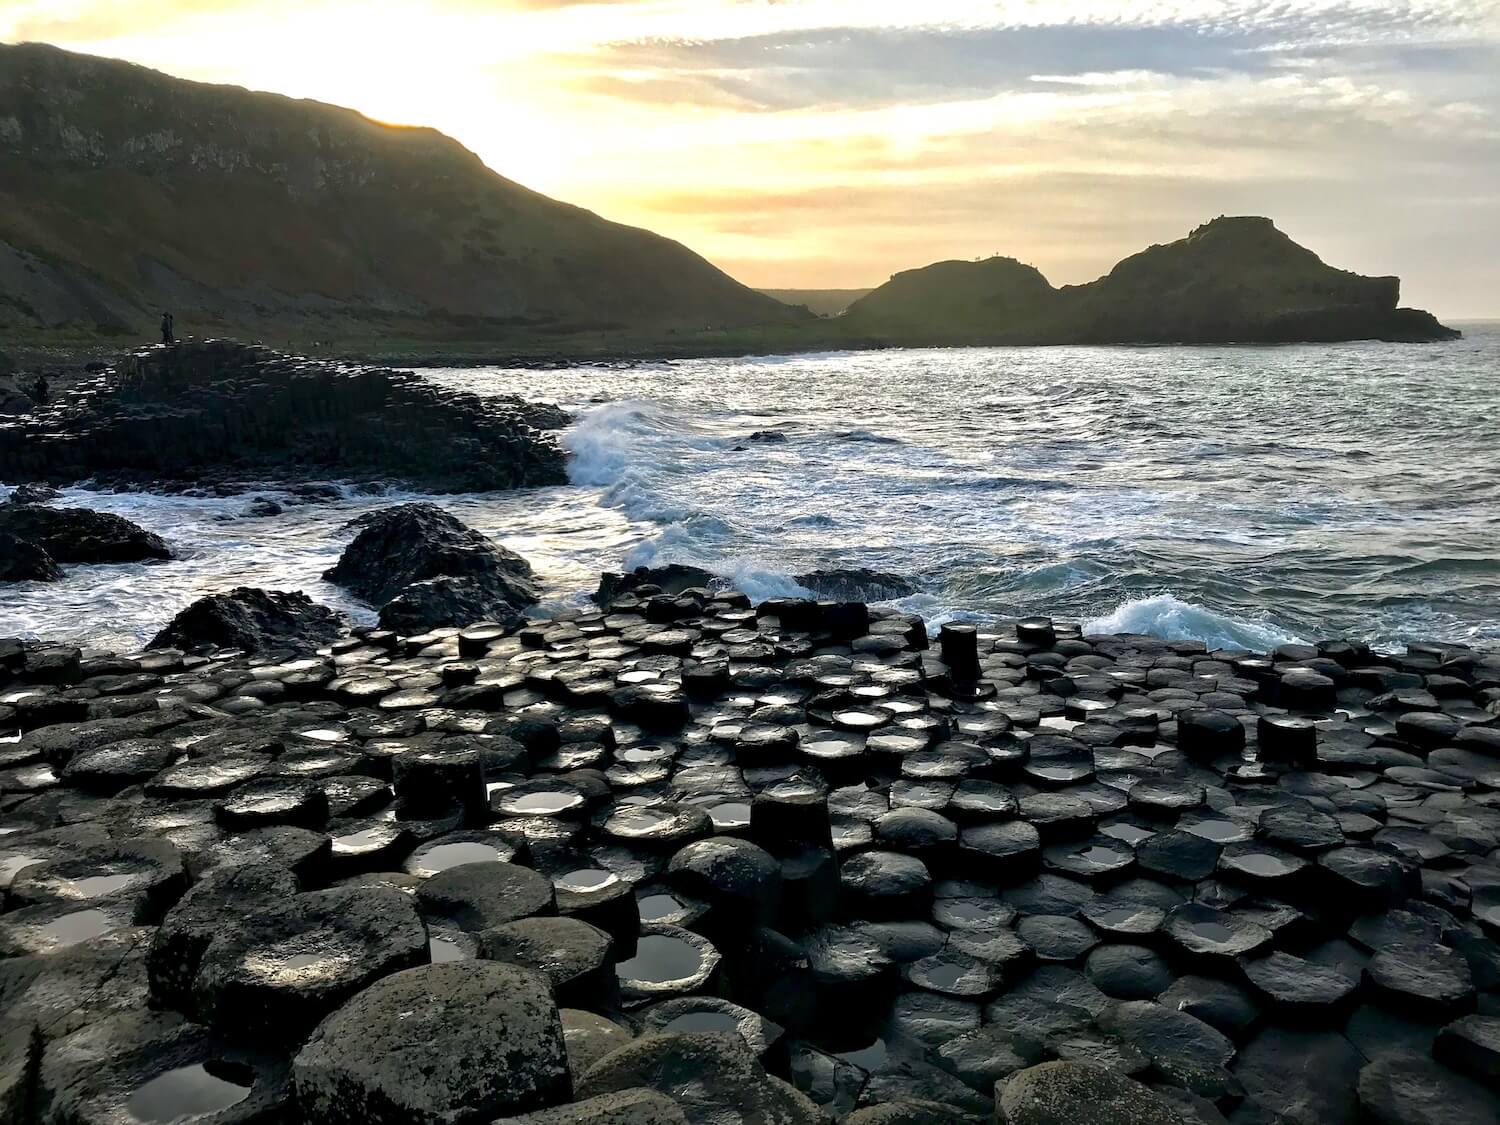 The Giant's Causeway is an area of about 40,000 interlocking basalt columns which are shown in the foreground of this photo. Dramatic high cliffs leading to the sea are in the background with blue sky.